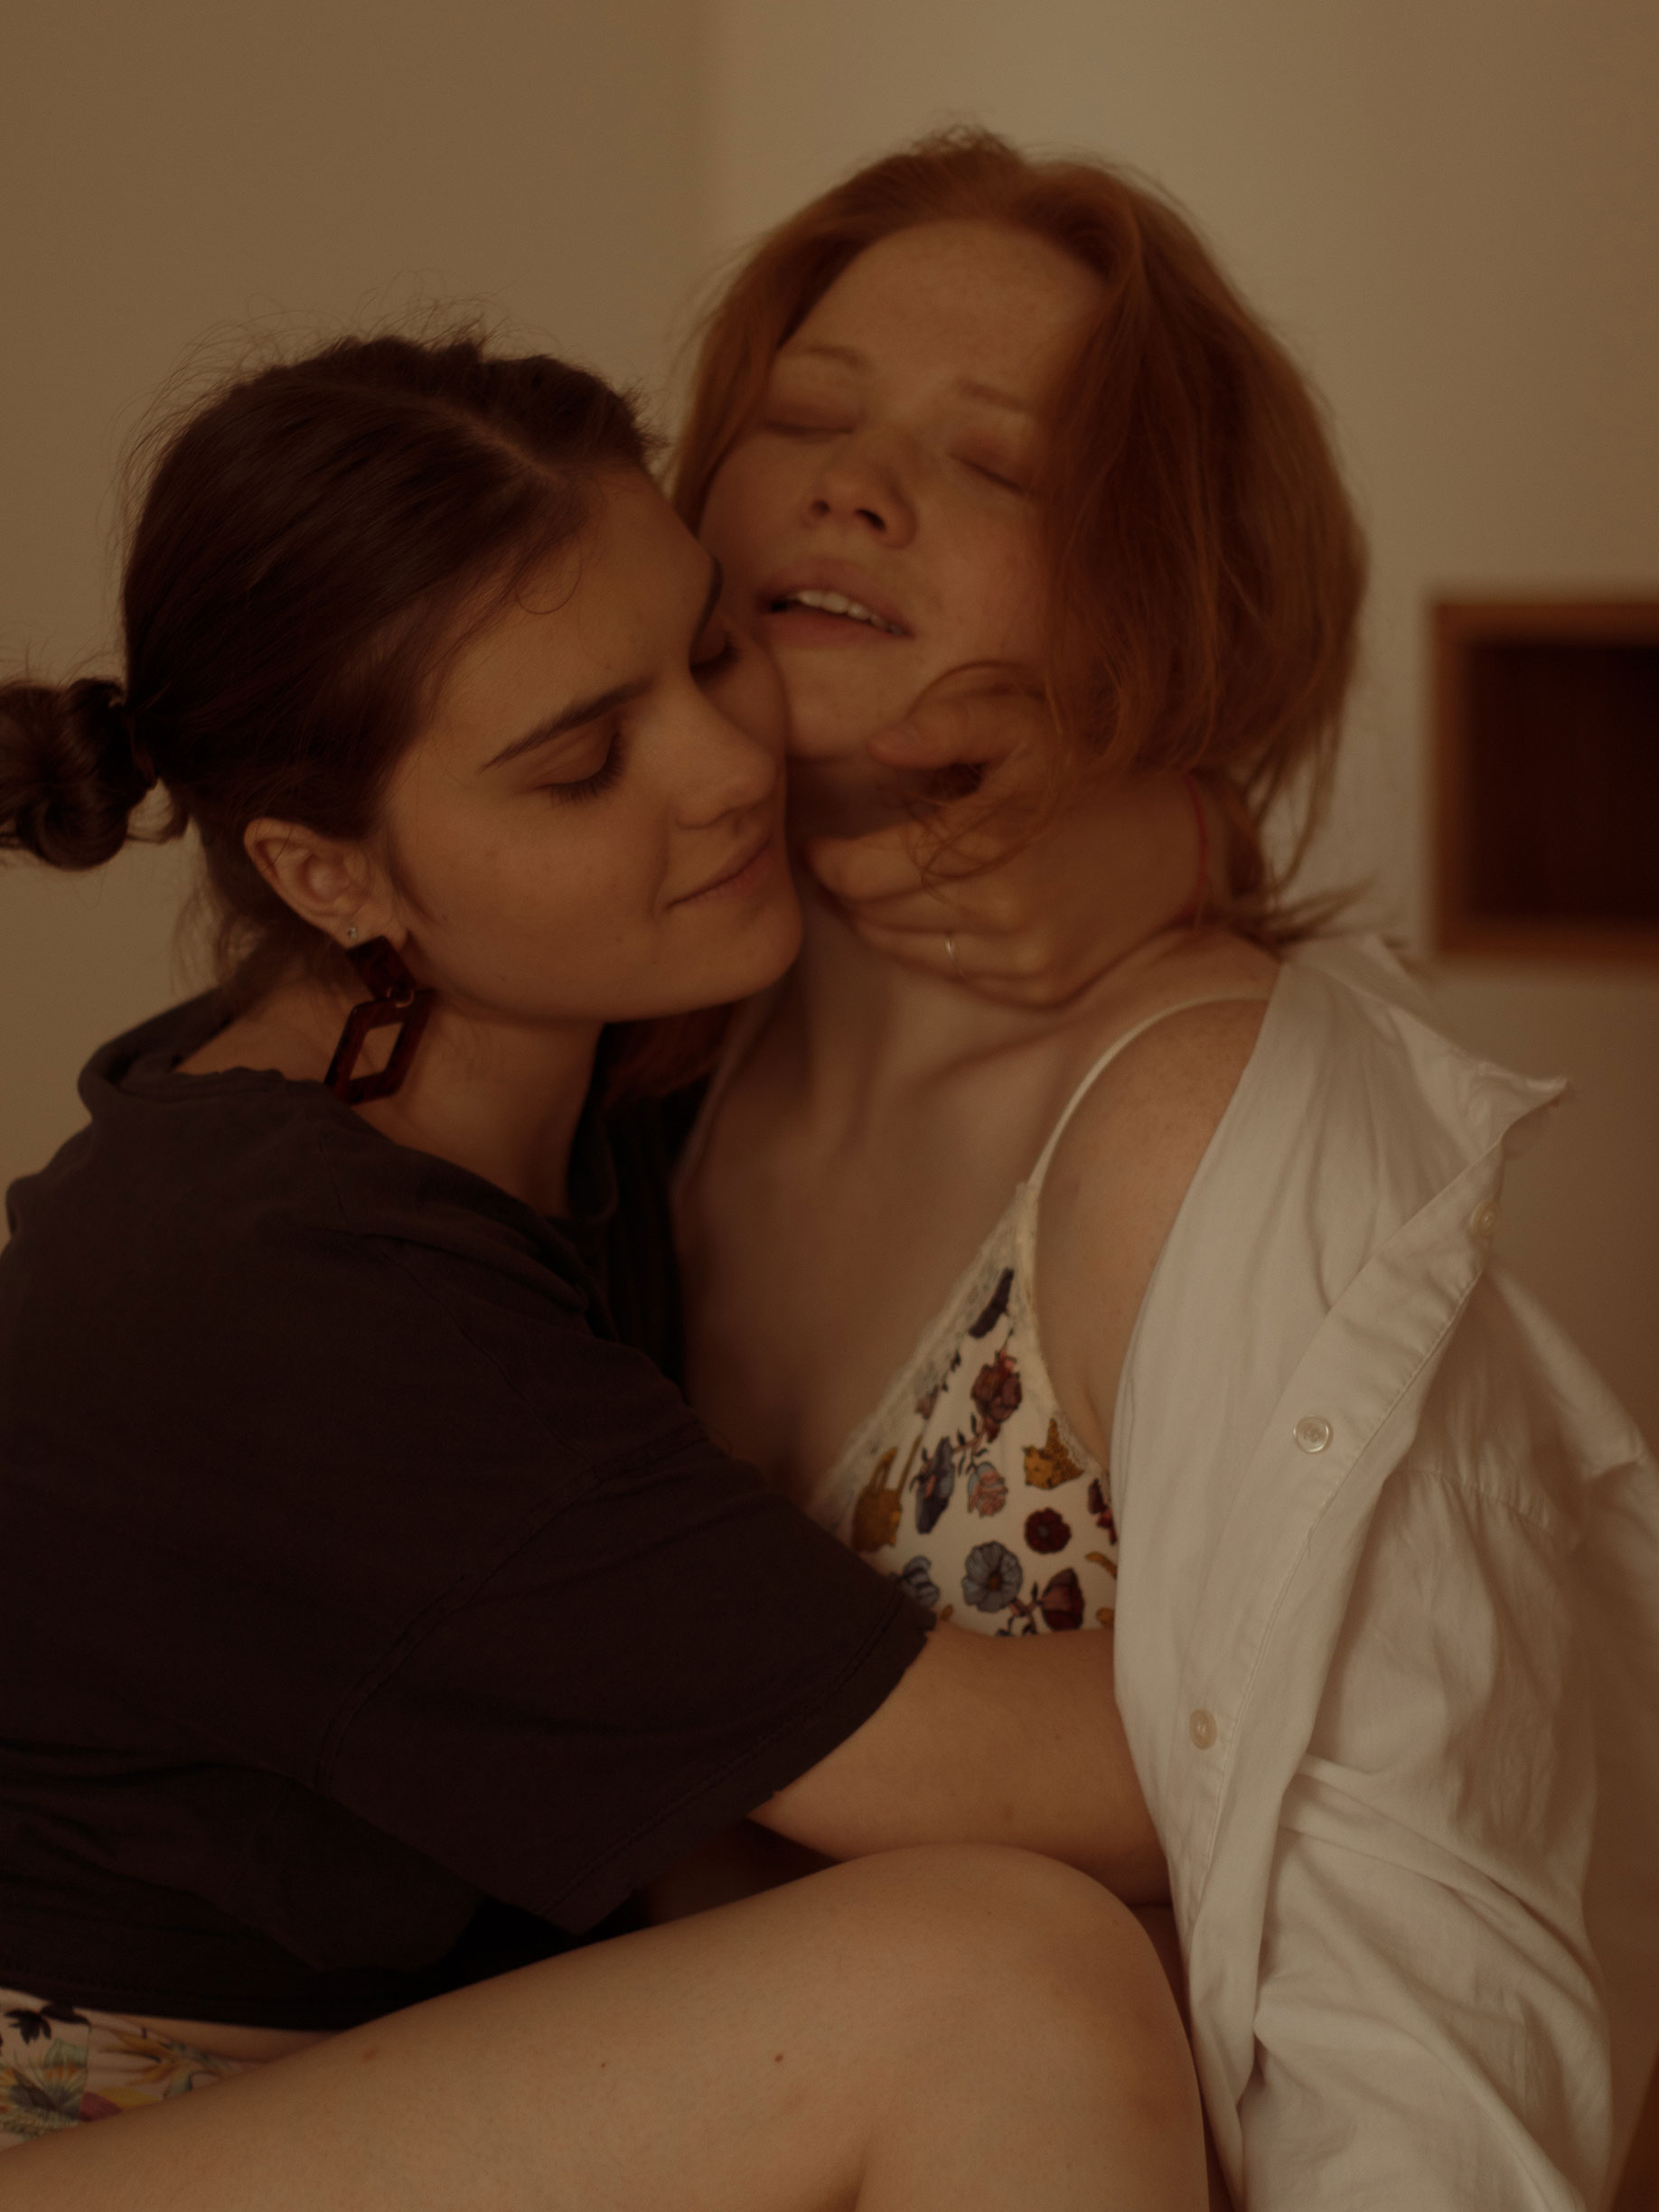 <p>The practice of Dasha Tchainki focuses on the female body and gentle empathetic portraiture. This portrait is of Sonya and Nika from a series on love stories of Russian queer women. Tchainki might be soft and dreamy, but it’s still political in promoting queer female gaze.</p>